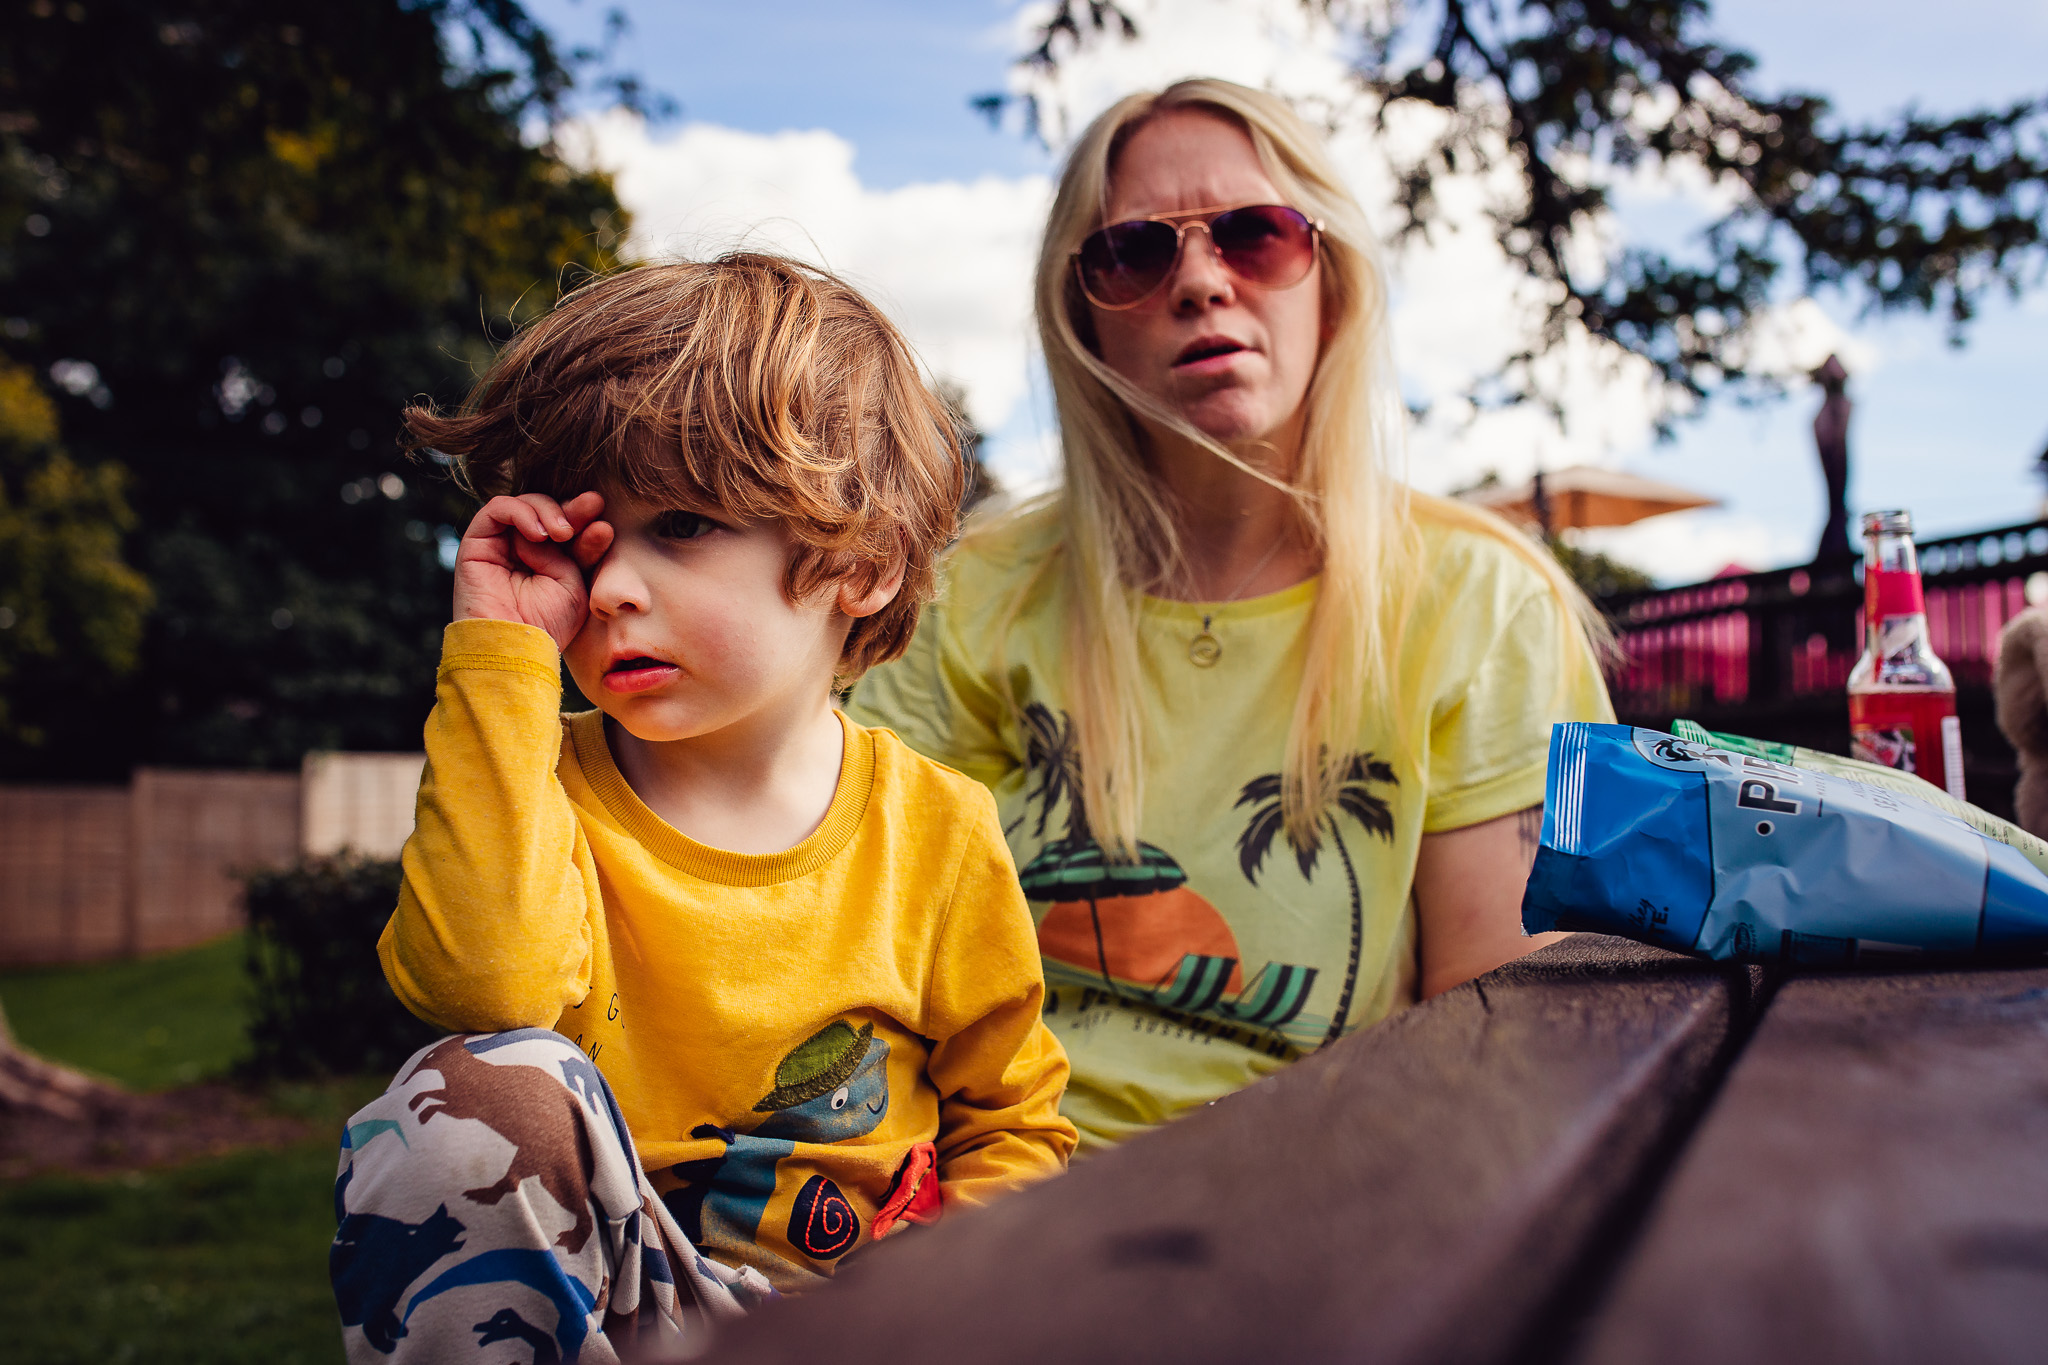 Mum and young son at a picnic table in a pub garden during a family photo session.